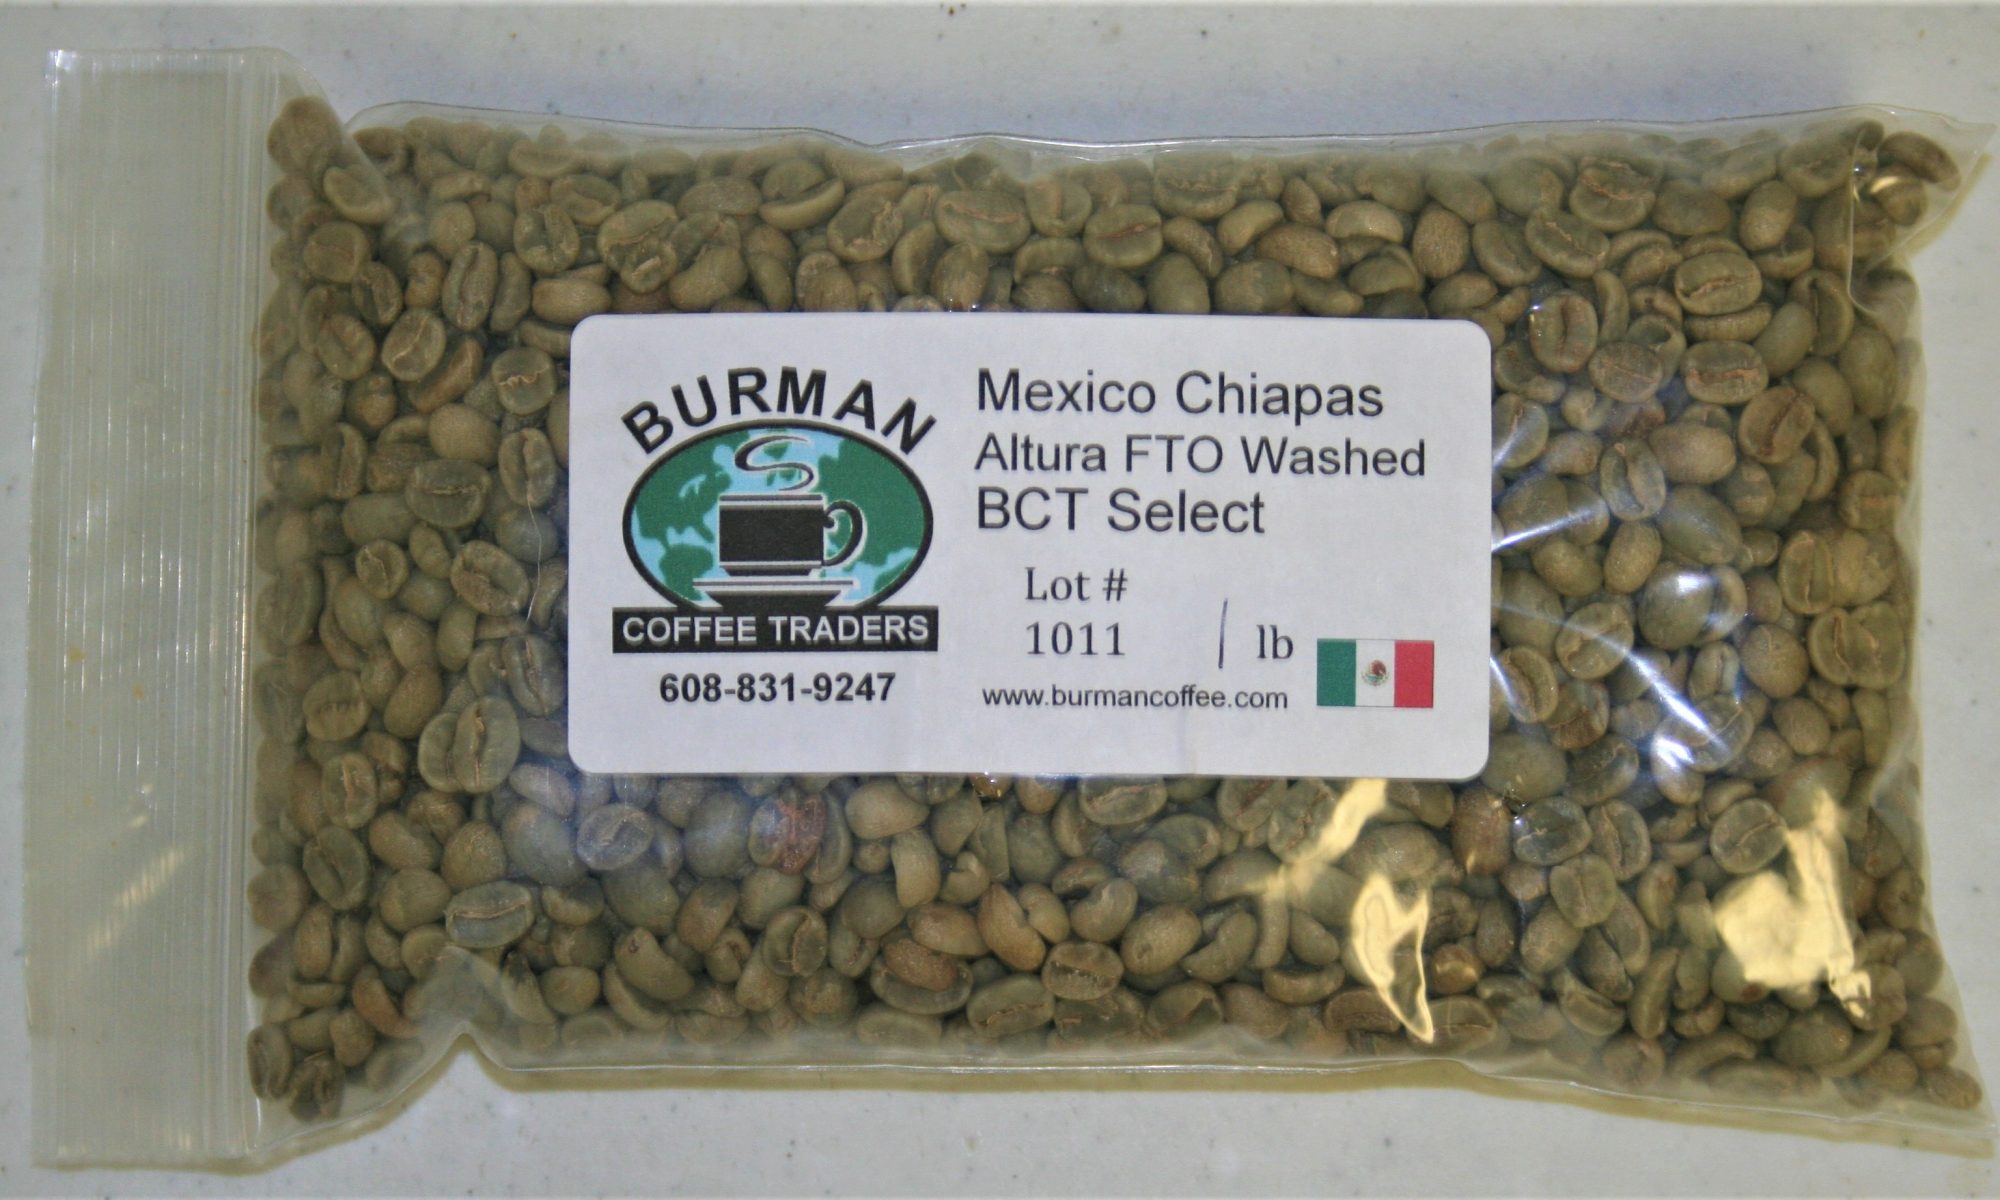 Mexico Chiapas Altura Washed FTO BCT Select coffee beans